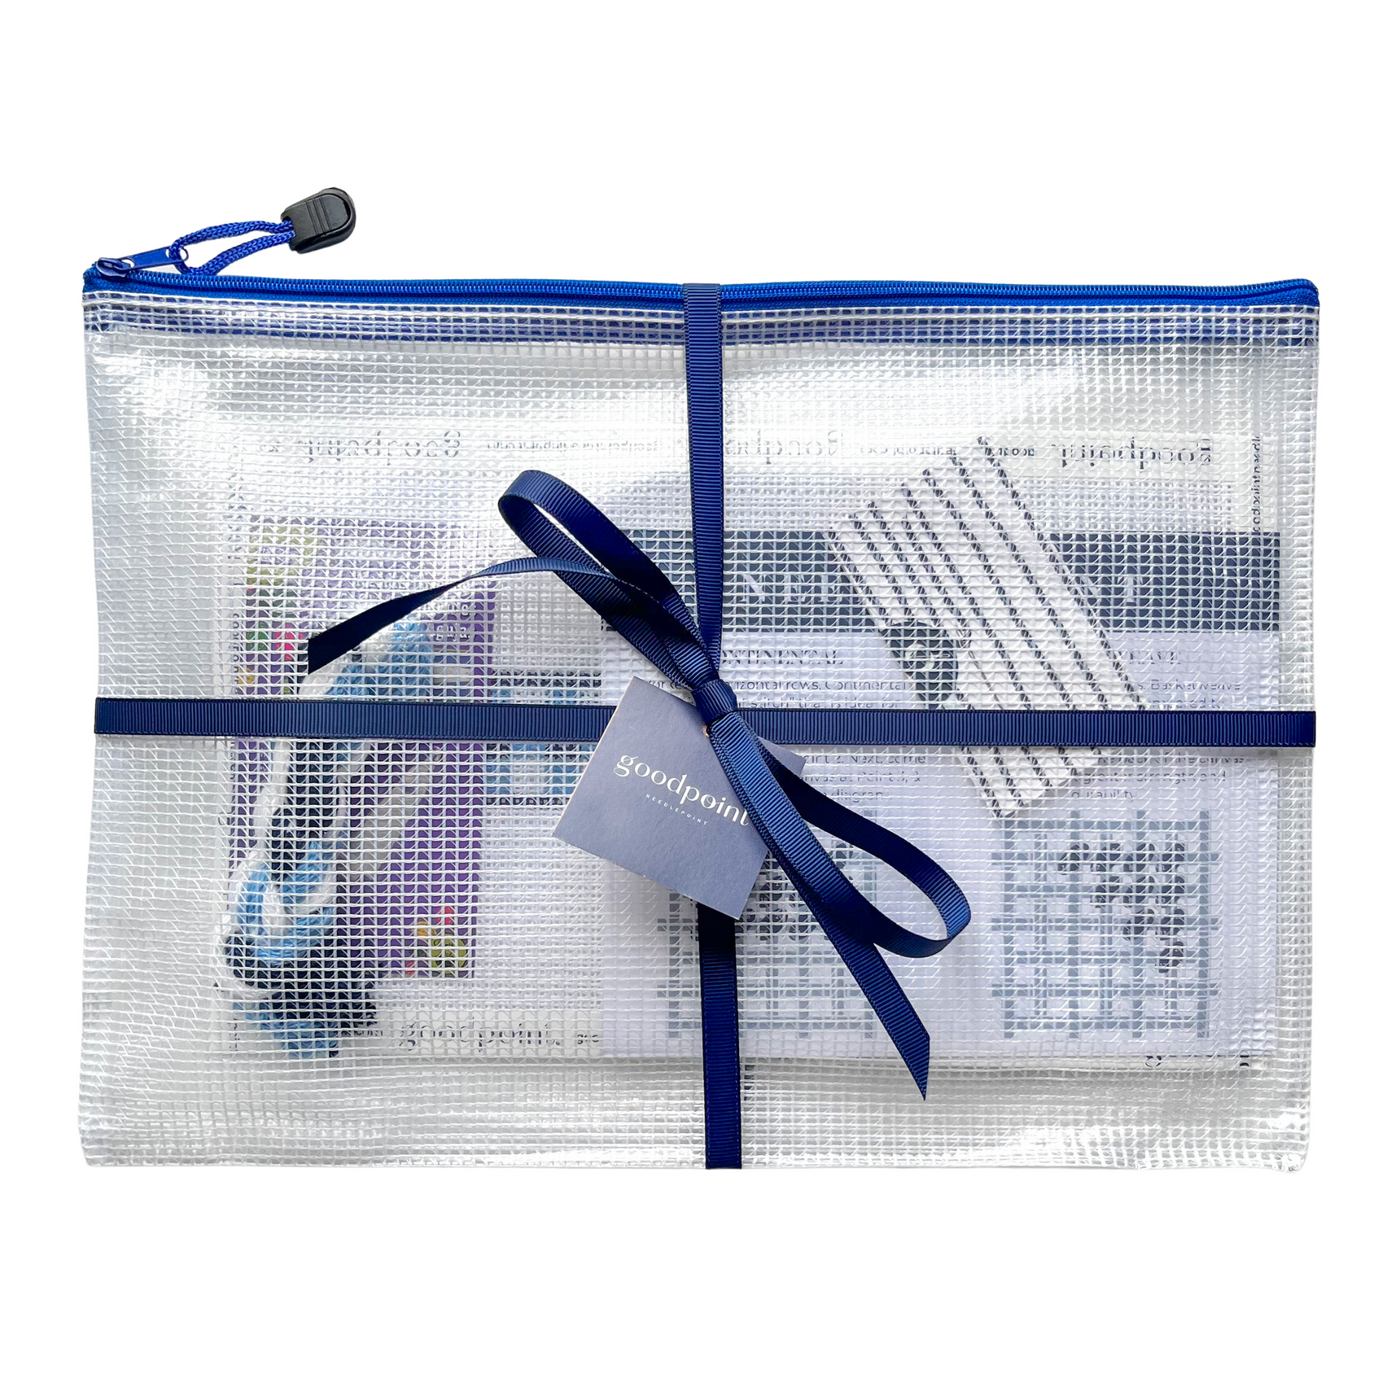 Project bag filled with needlepoint supplies is tied up in a navy grosgrain bow